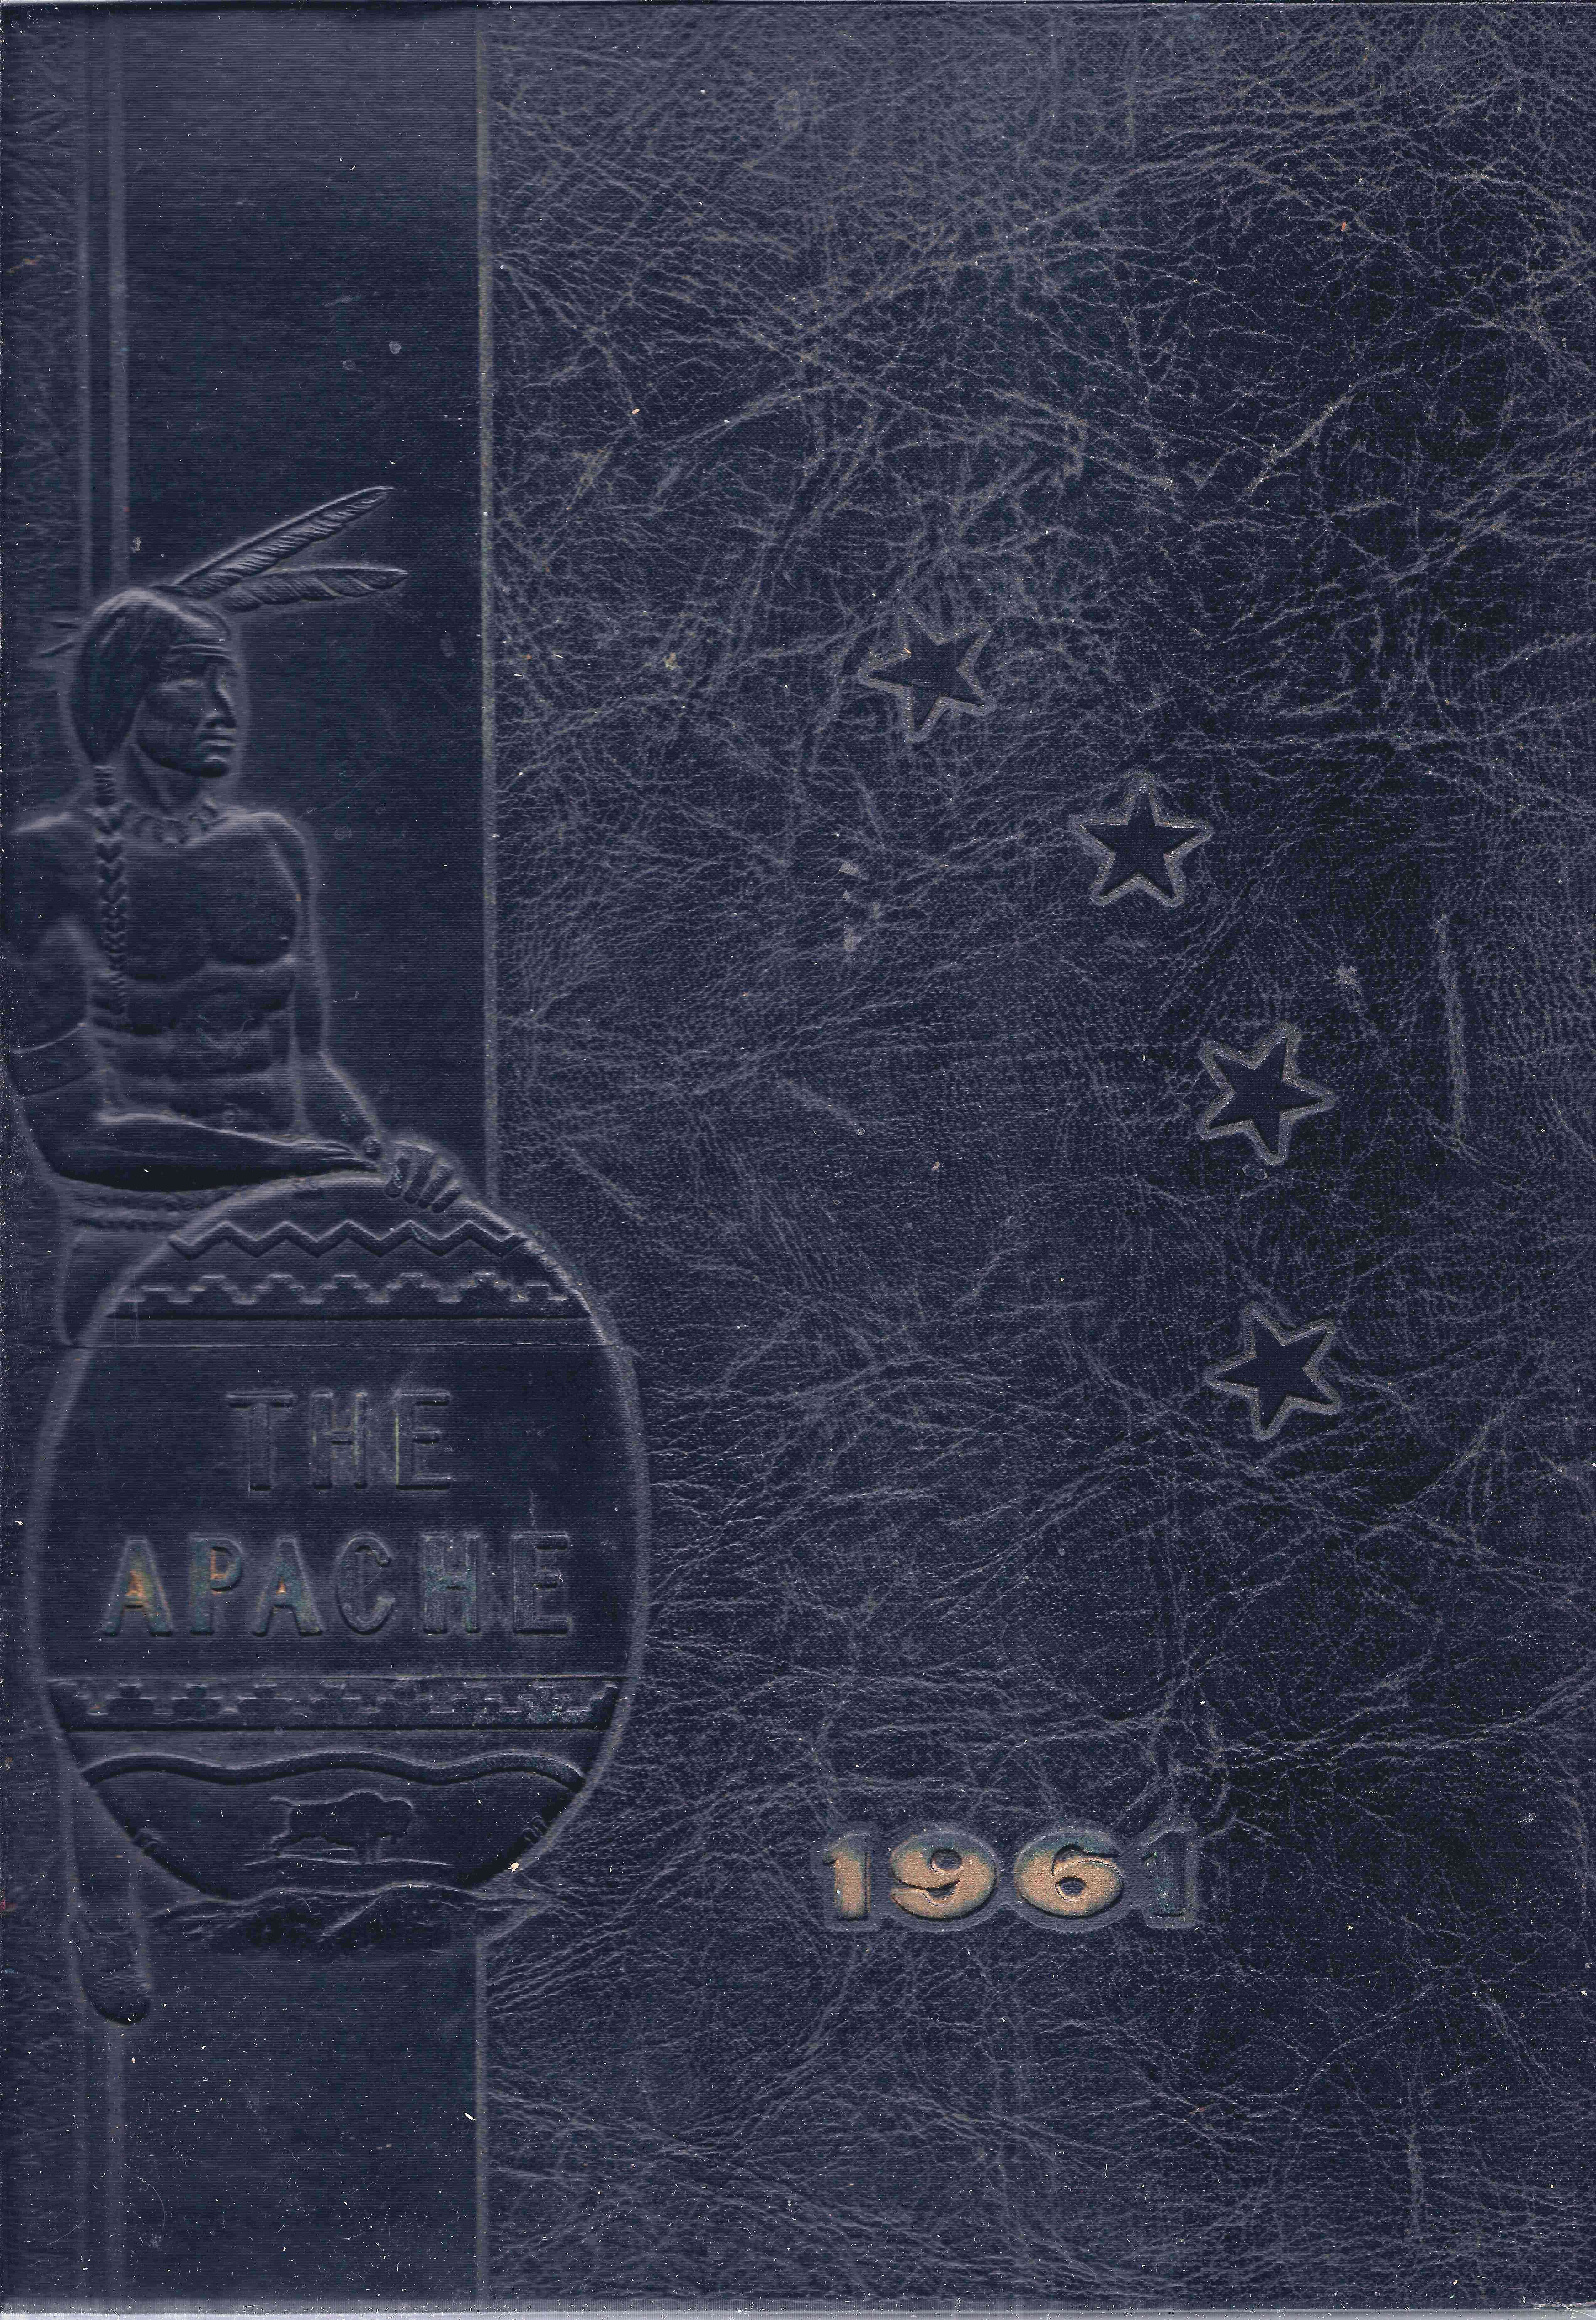 1961 for Tyler Junior College Apache Annual Yearbook , Tyler, Smith County, Texas.